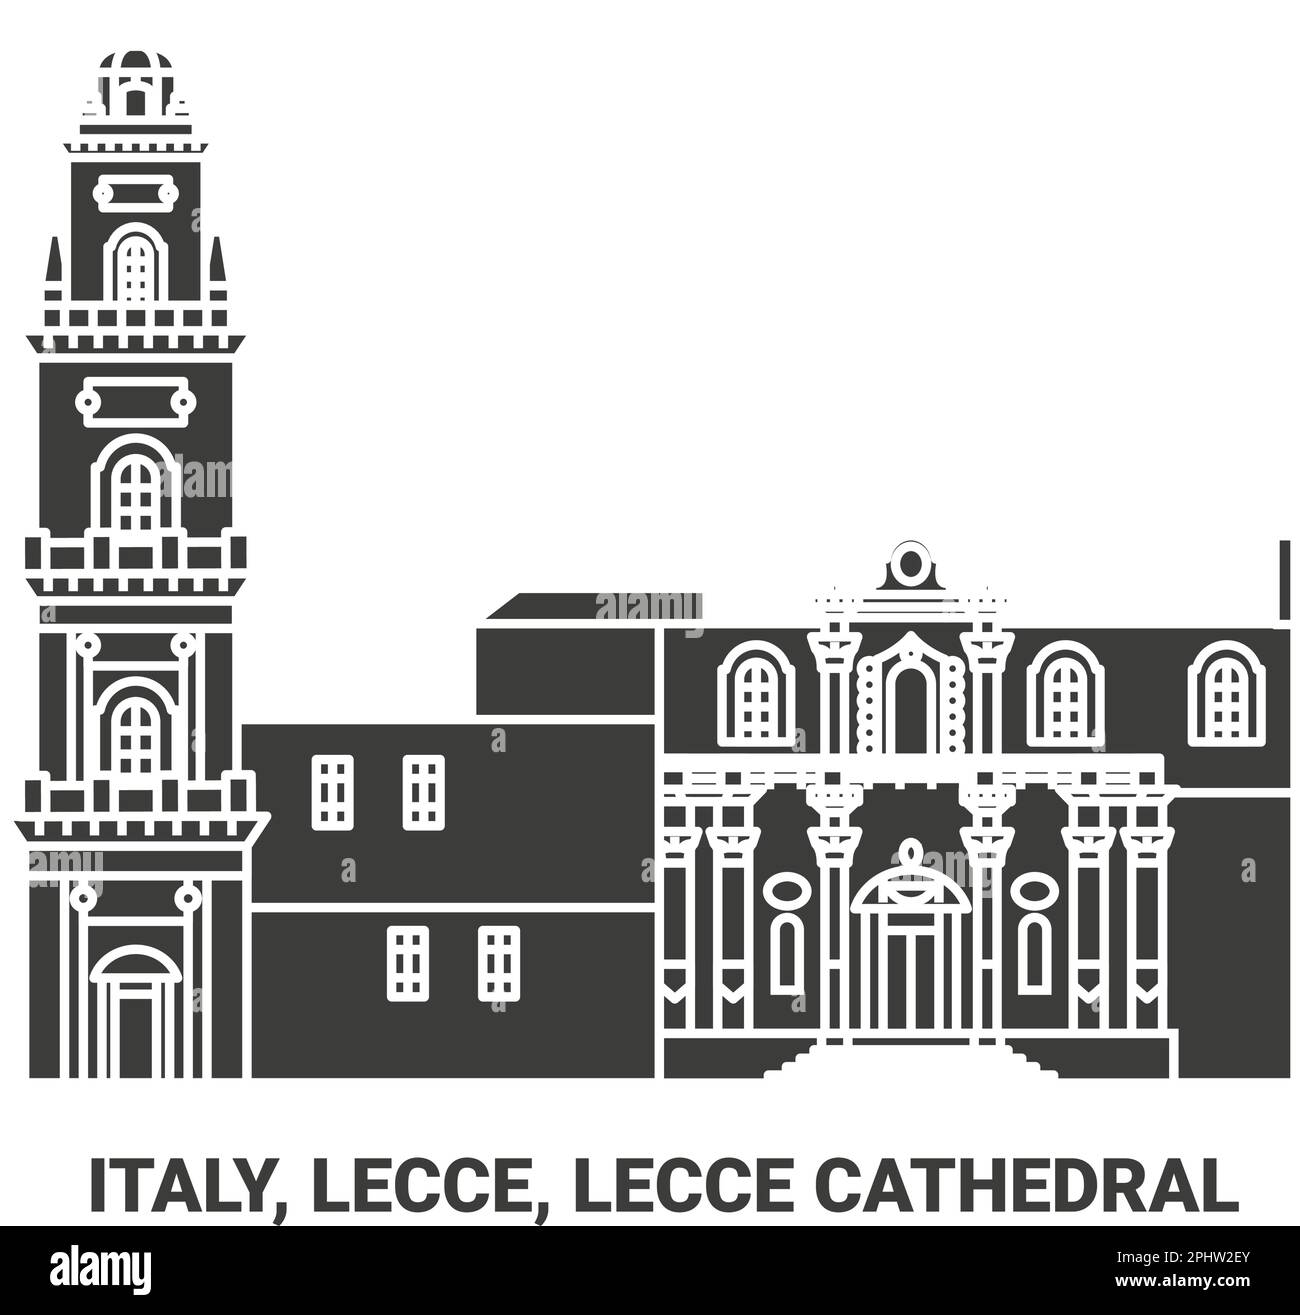 Italy, Lecce, Lecce Cathedral travel landmark vector illustration Stock Vector